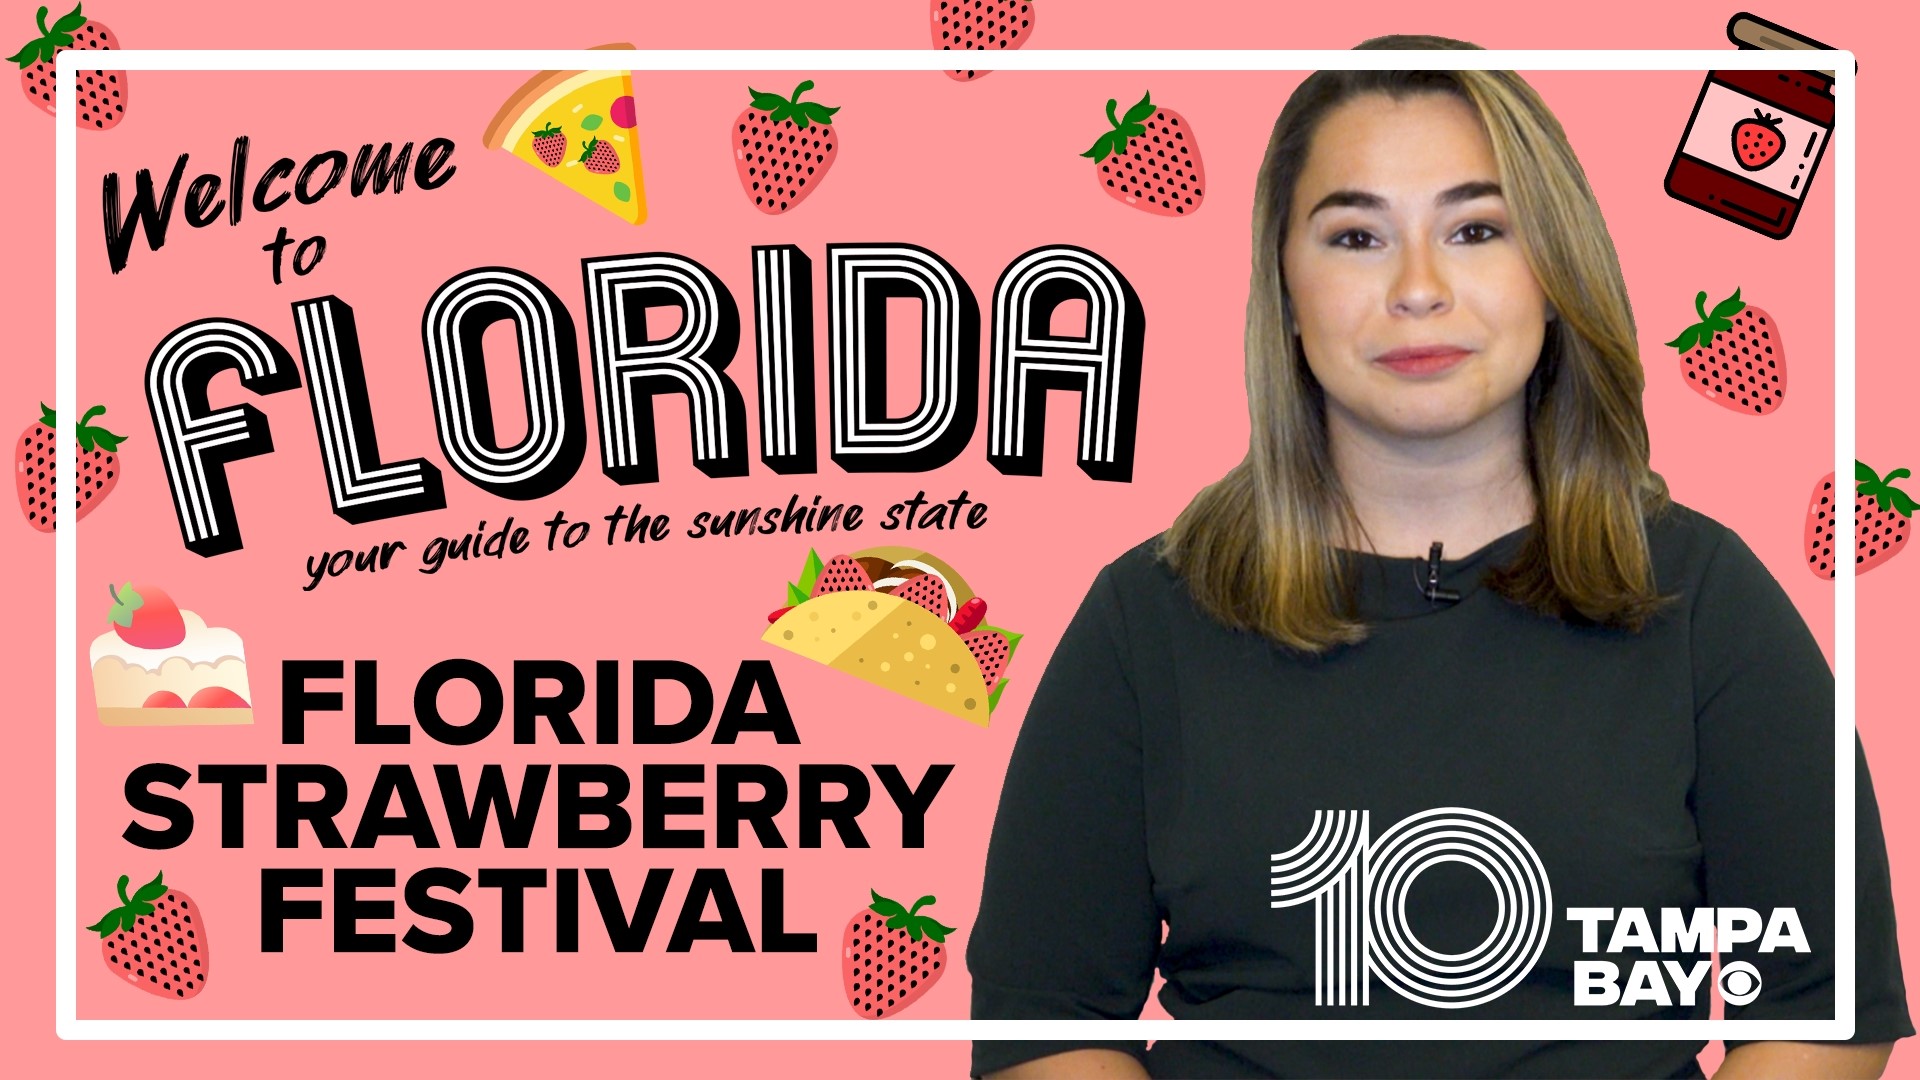 Plant City is celebrating the annual Florida Strawberry Festival. But, how did the city become so well-known for growing strawberries?